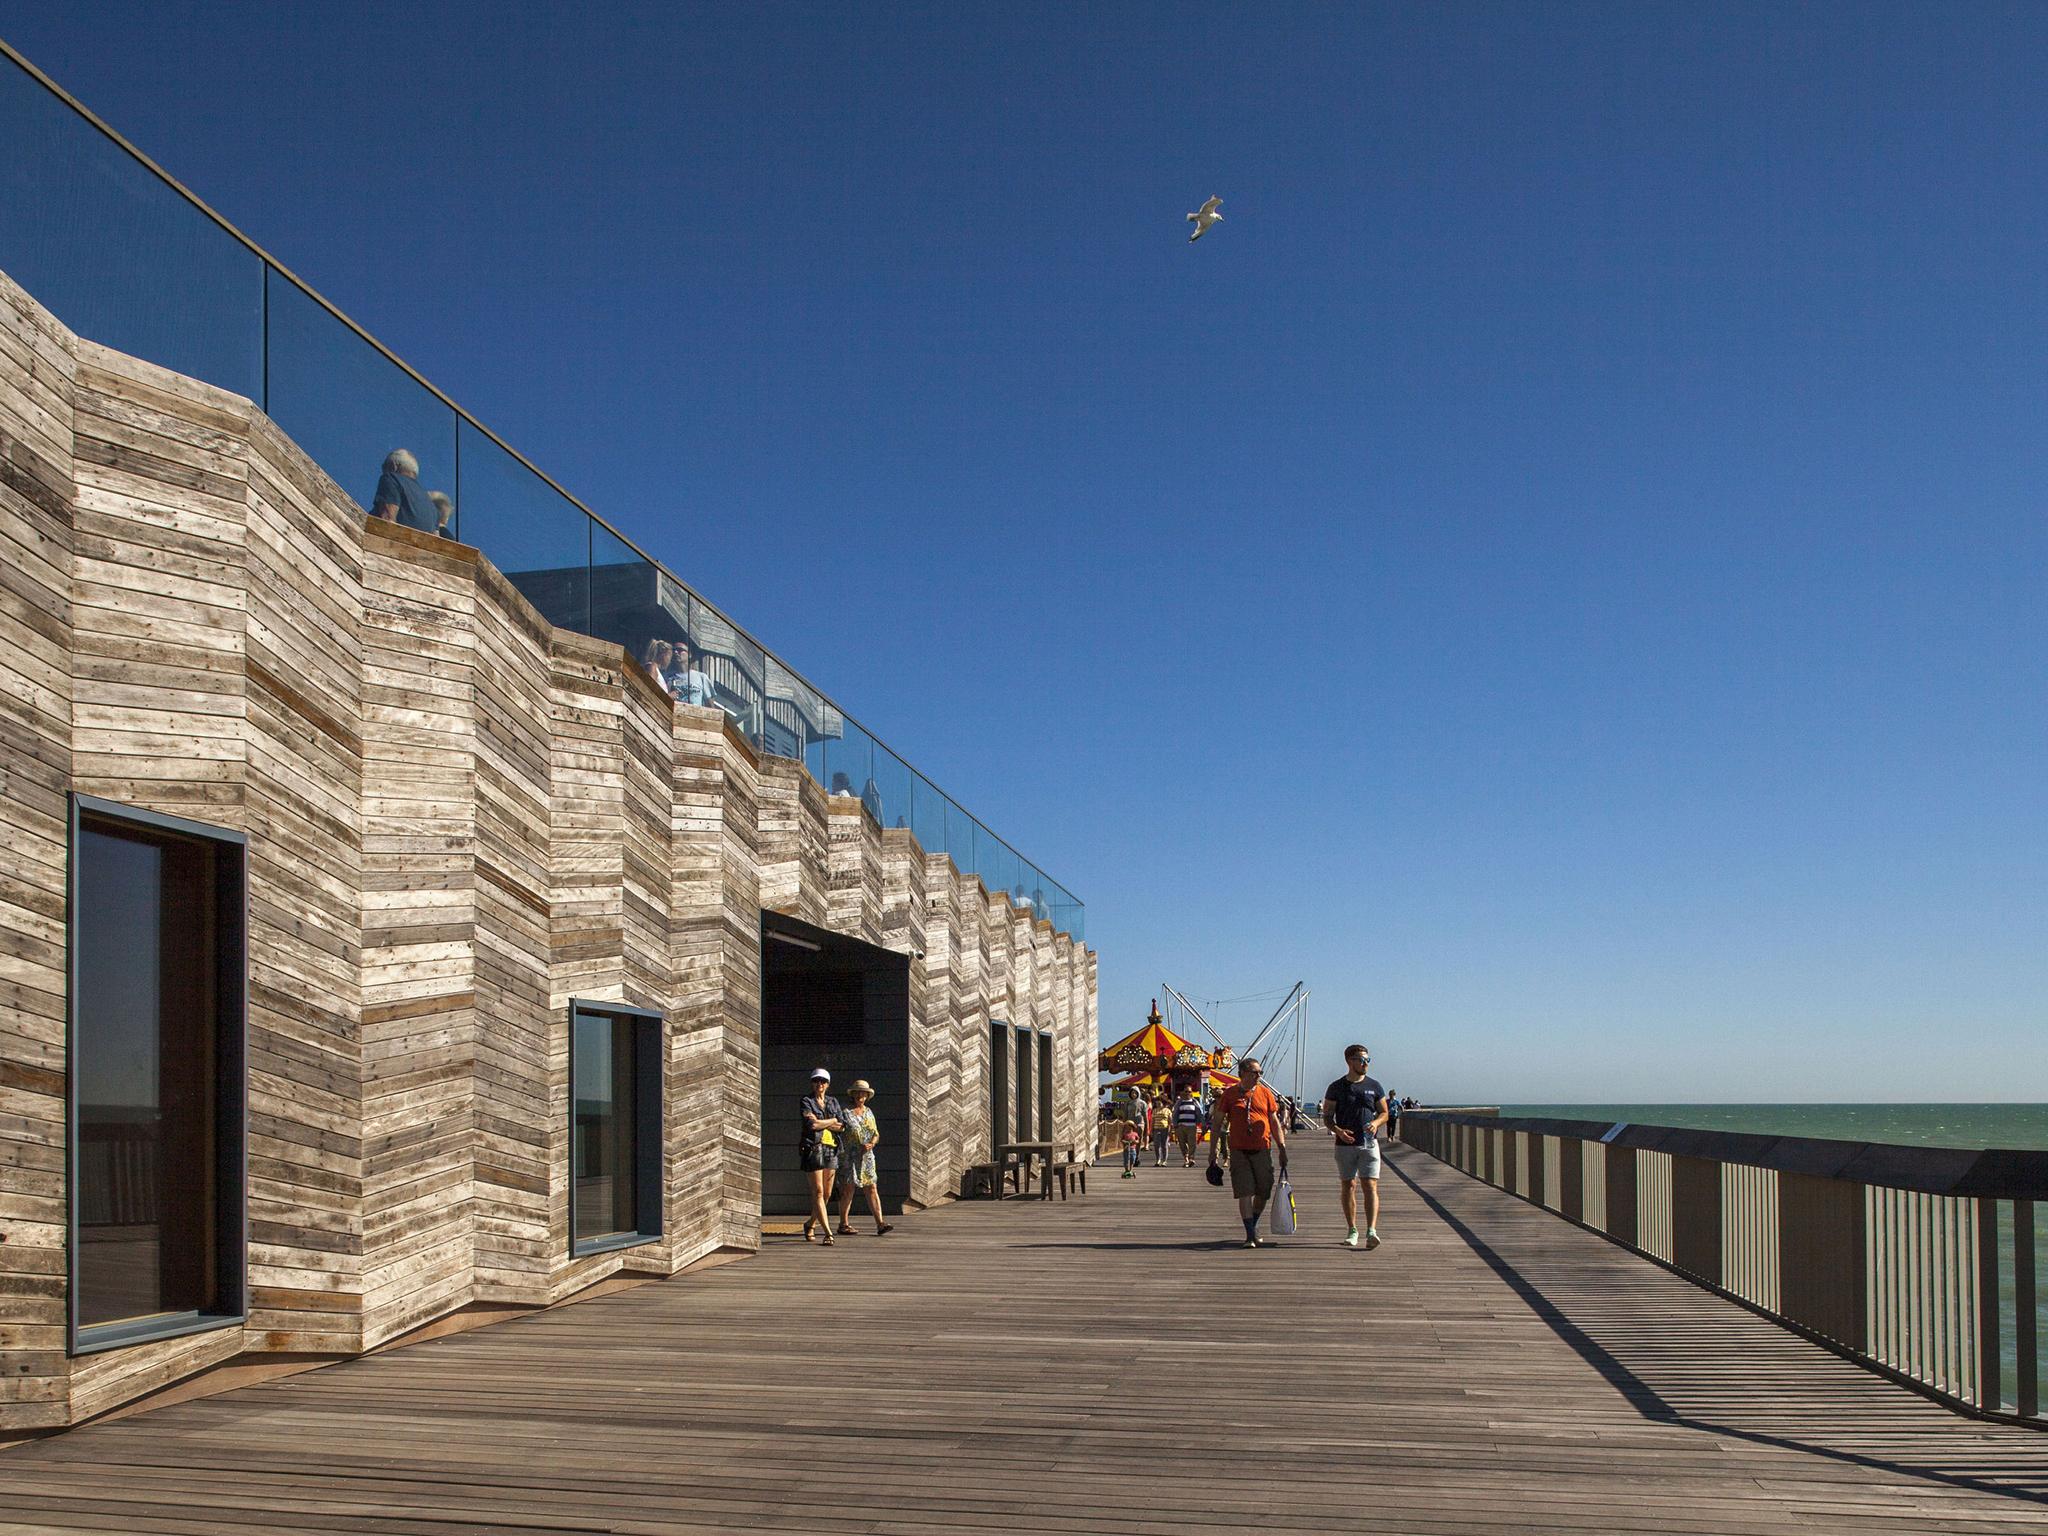 After: the smart new promenade has given the people of the seaside town a sense of pride